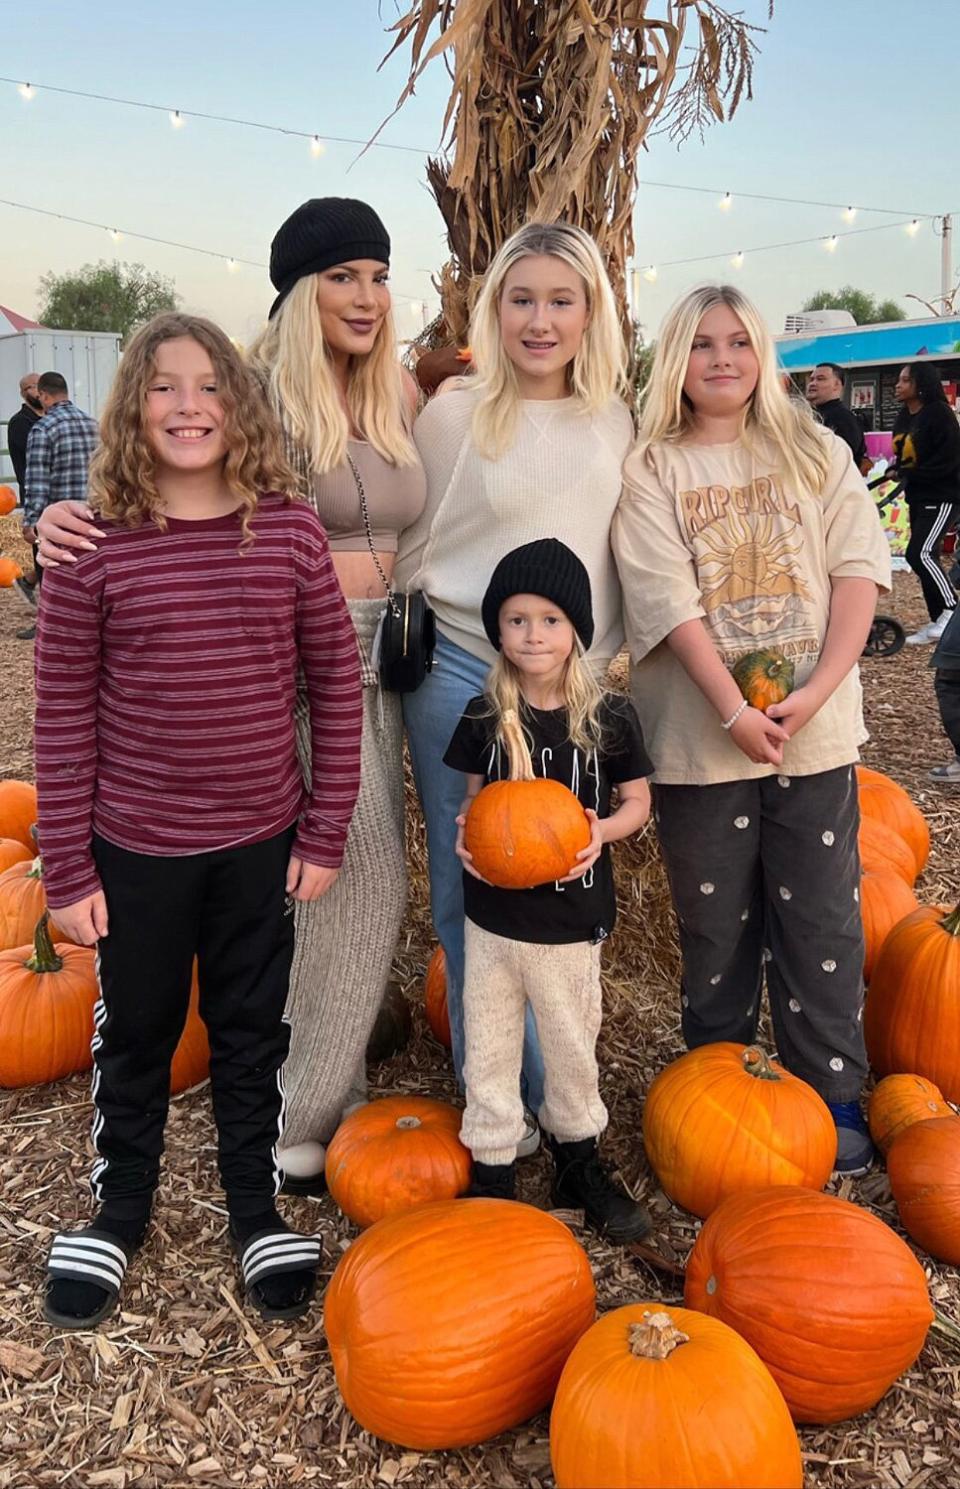 Tori Spelling's Kids Look All Grown Up As They Enjoy Pumpkin Picking and Carving Together